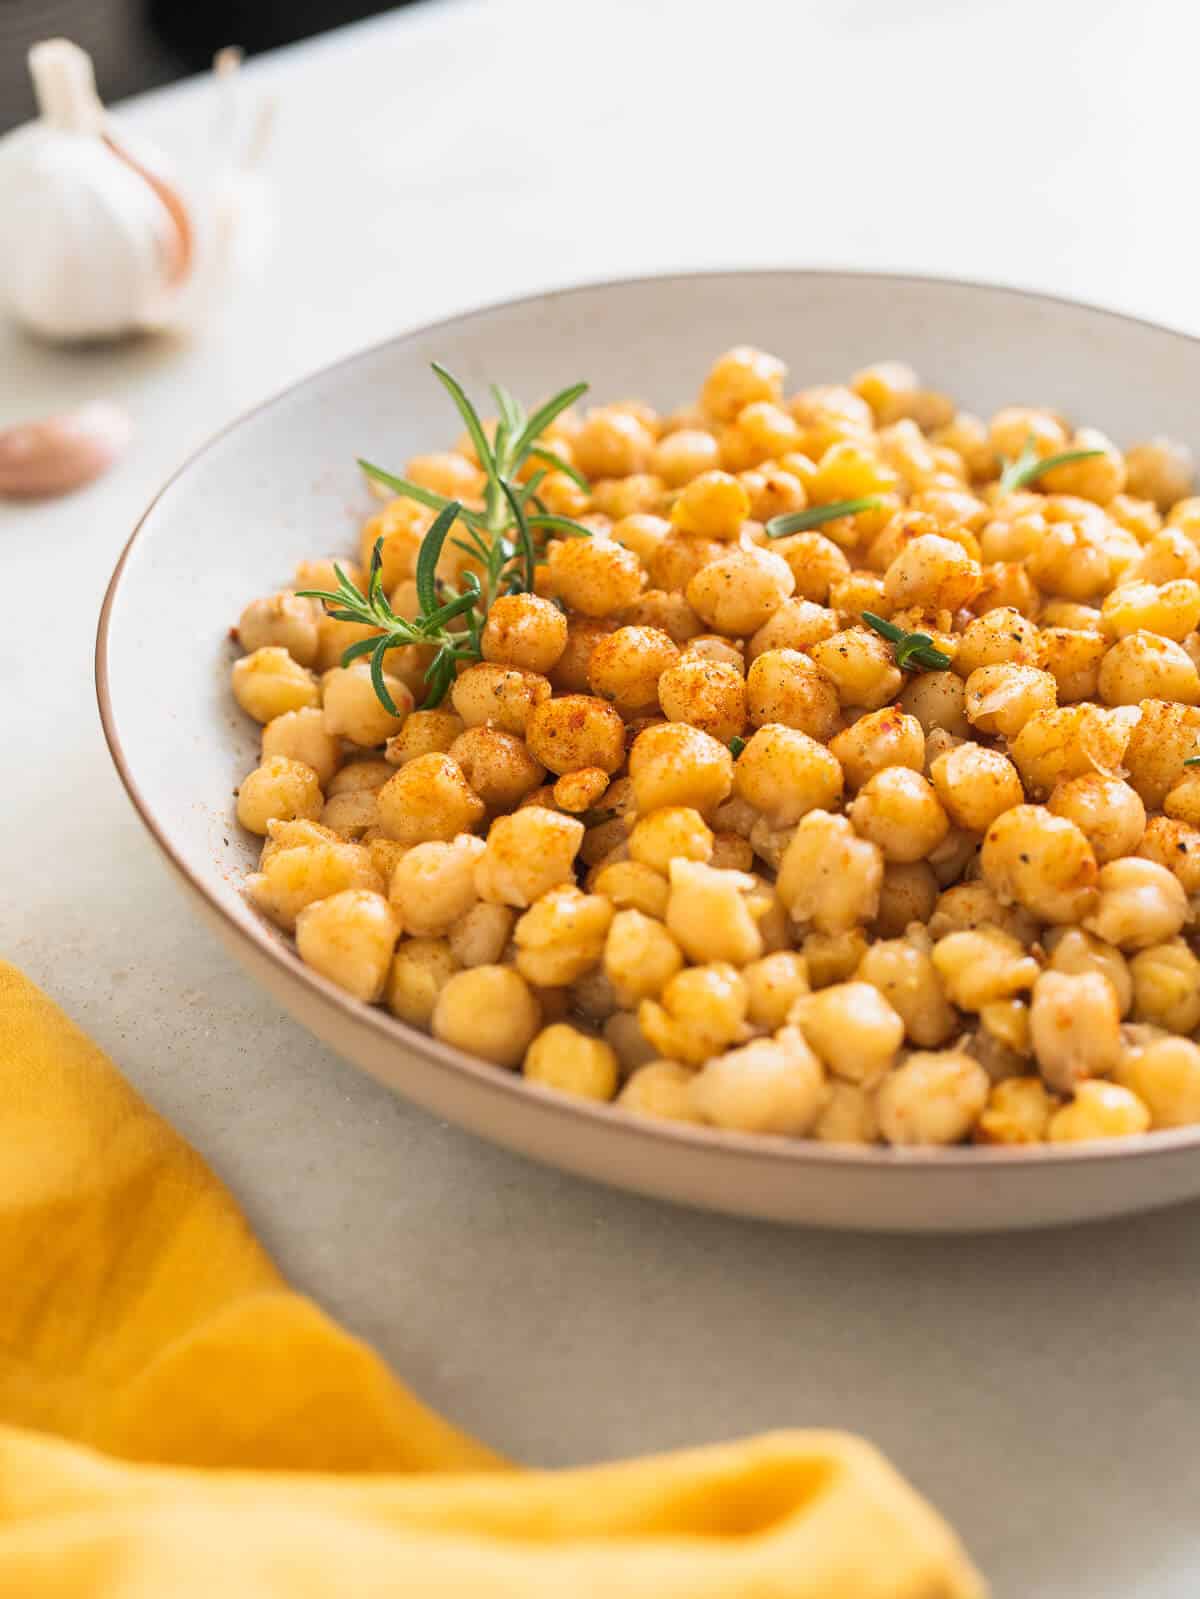 cooked chickpeas seasoned in a bowl.